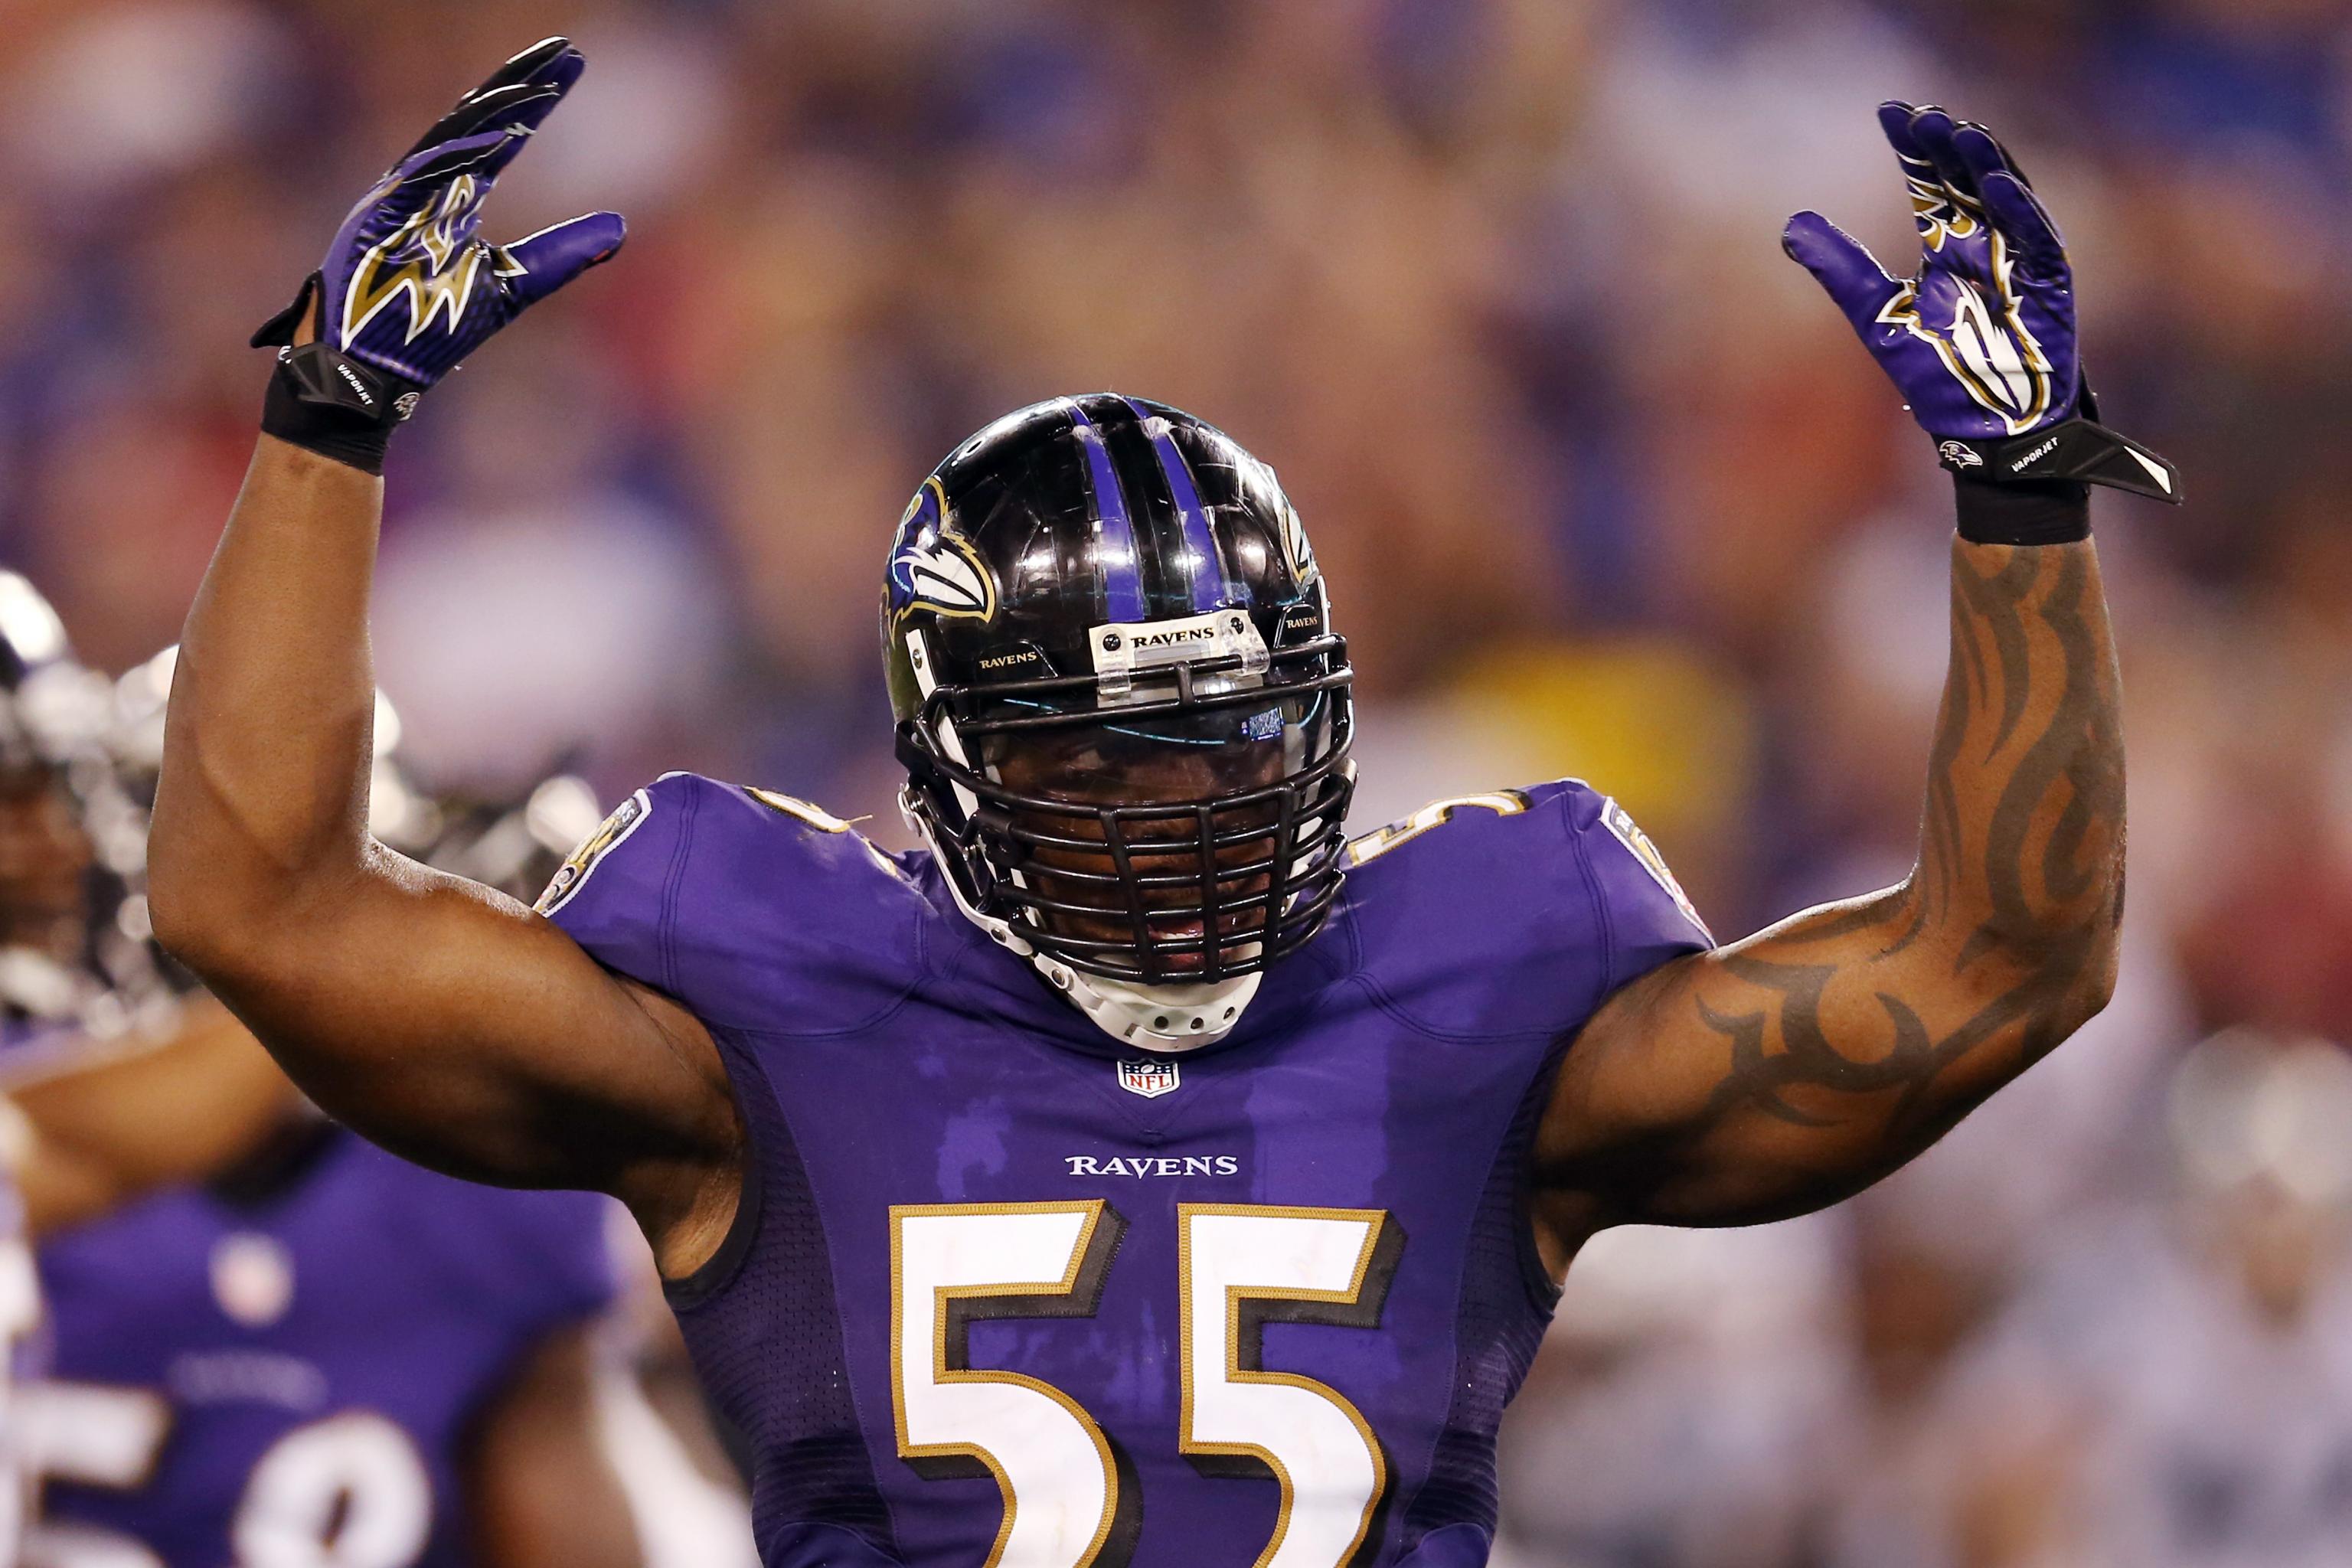 At 35, Ravens rush linebacker Terrell Suggs proves he is still a